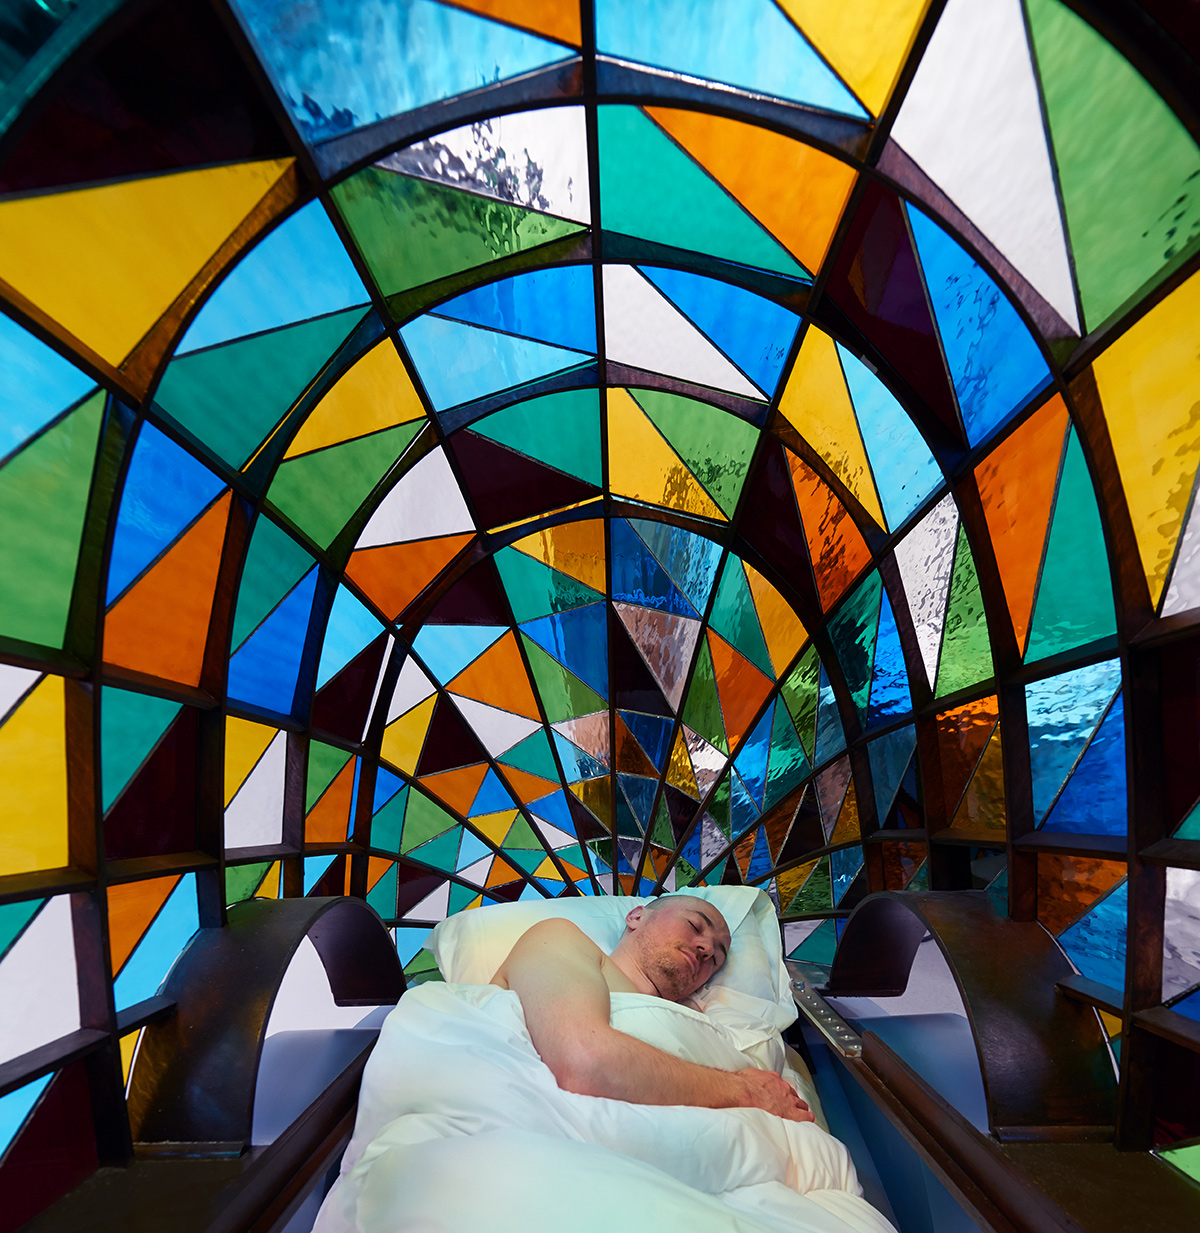 Stained glass driverless sleeper car